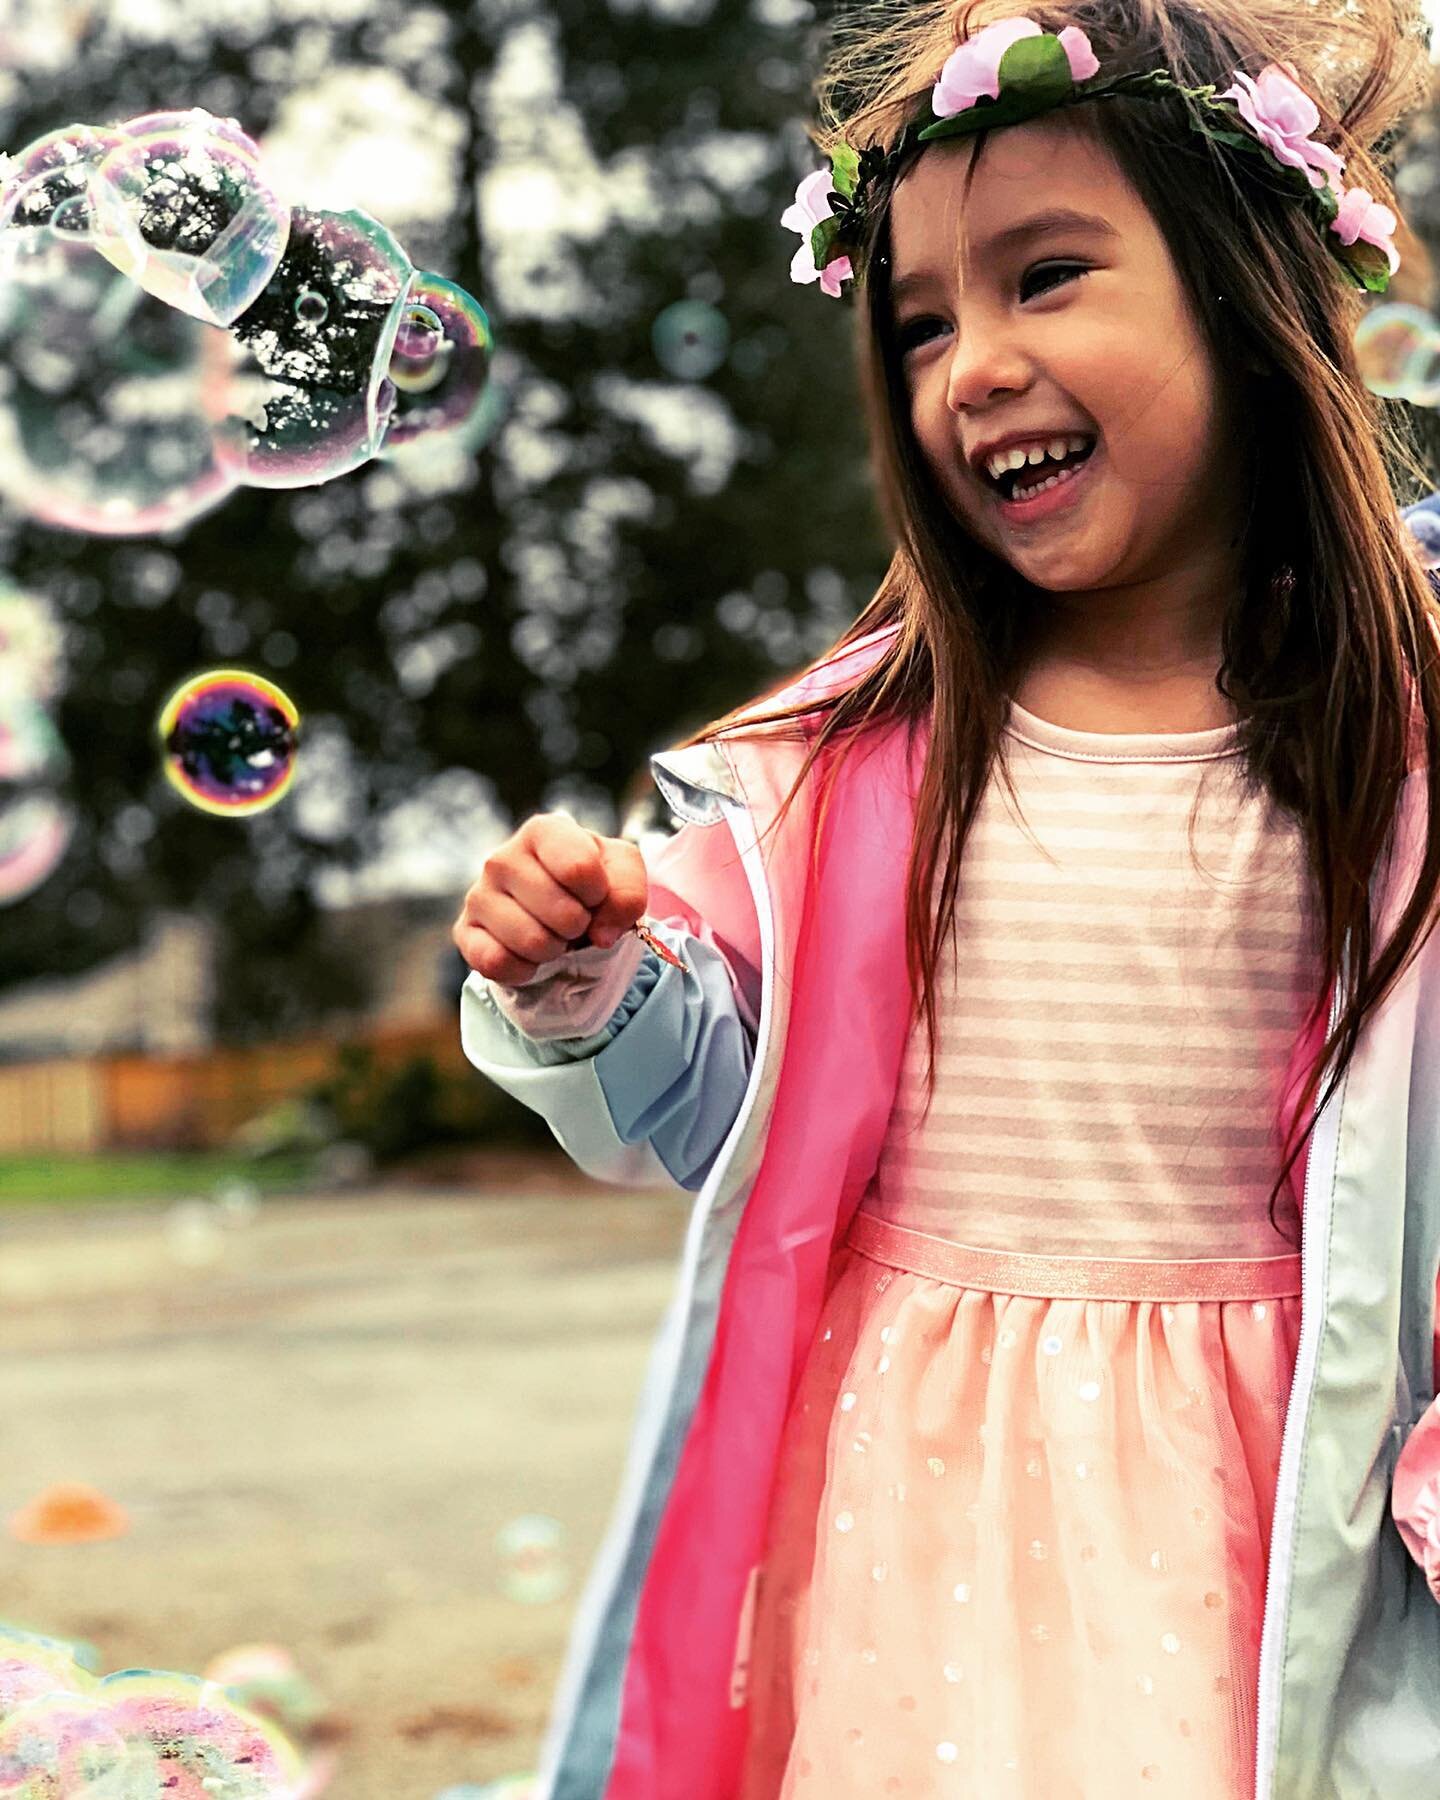 It may still be winter, but days like today remind us that spring is just around the corner! Get your bubbles now so you&rsquo;re ready to take advantage of ☀️ days like today! 

#SunsOutBubblesOut #bubbleworld #smiles